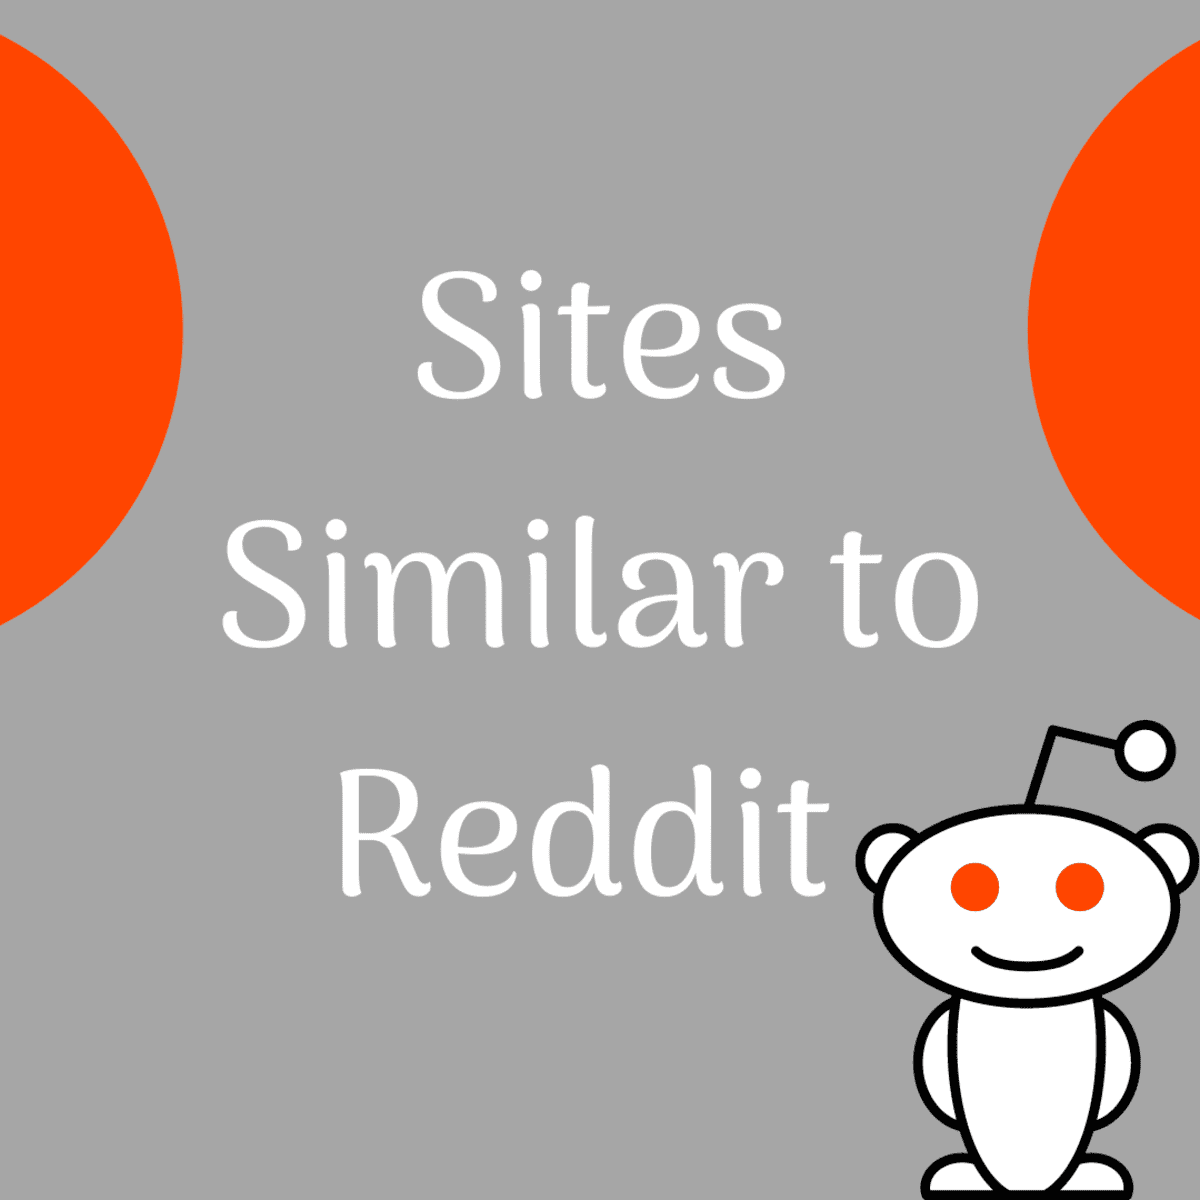 sites like reddit and 4chan